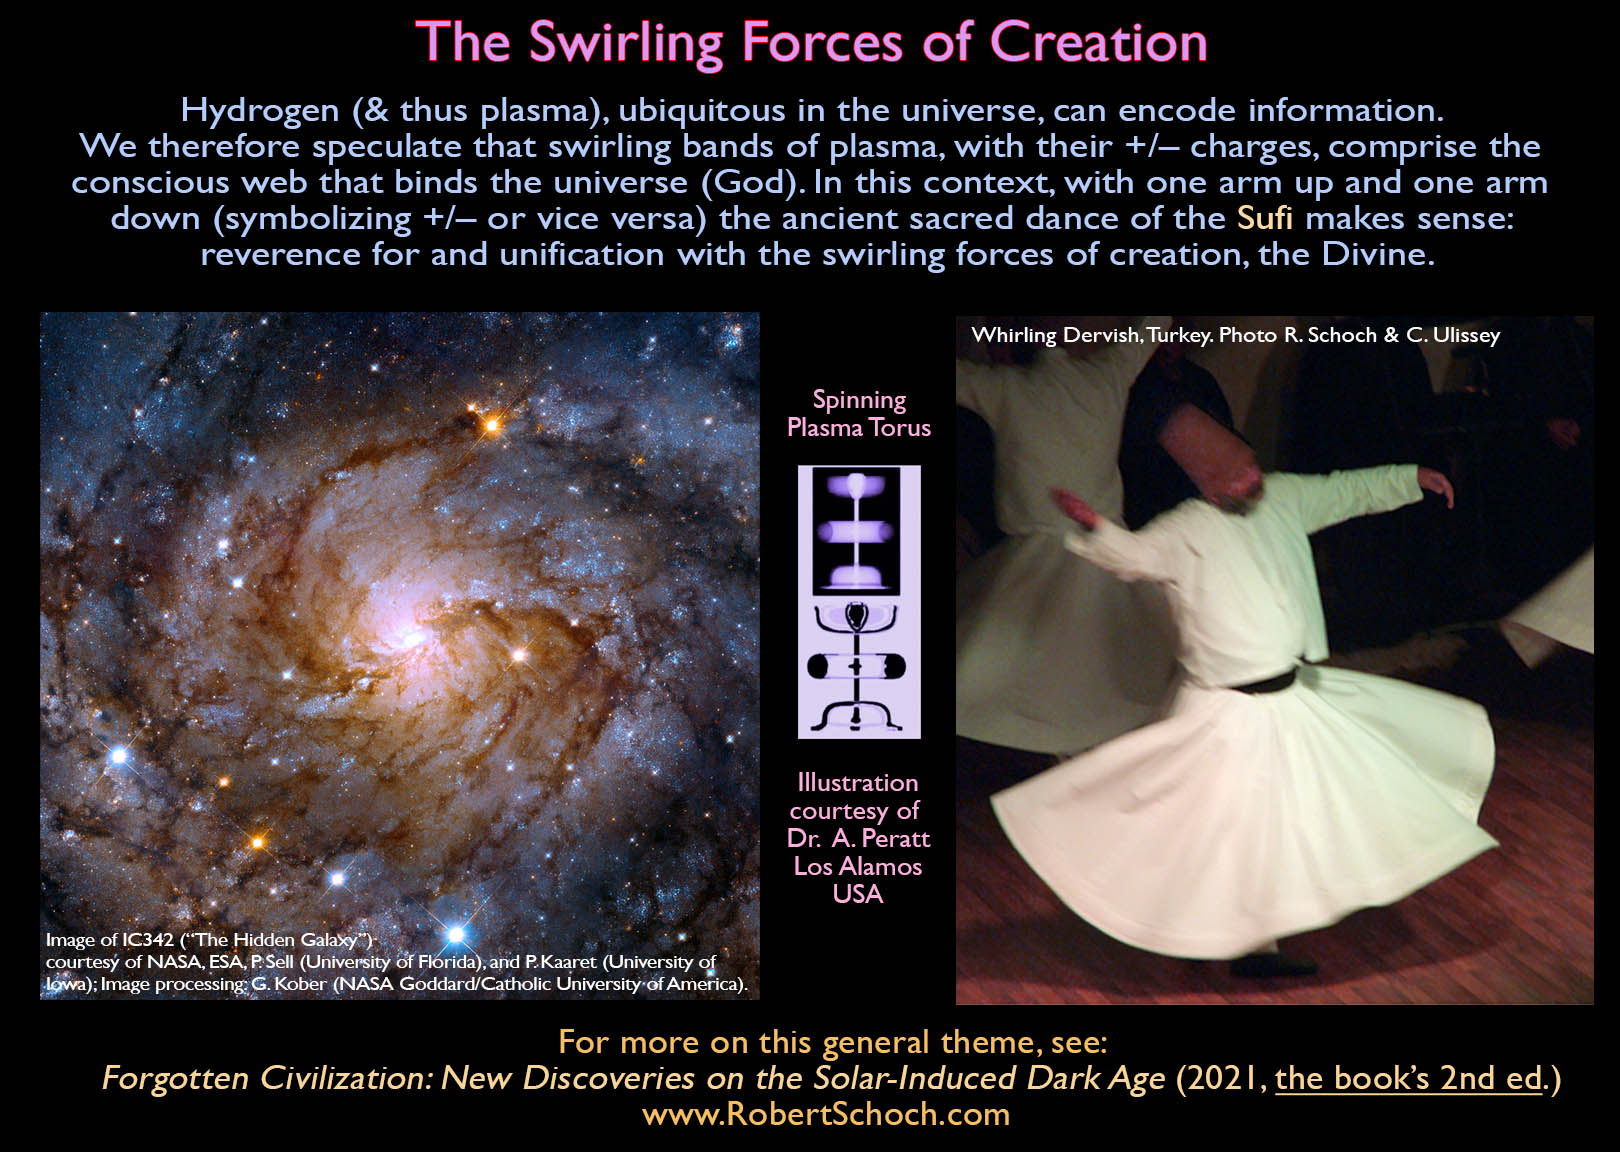 A meme regarding our plasma universe and the sacred dance of the Sufi's.